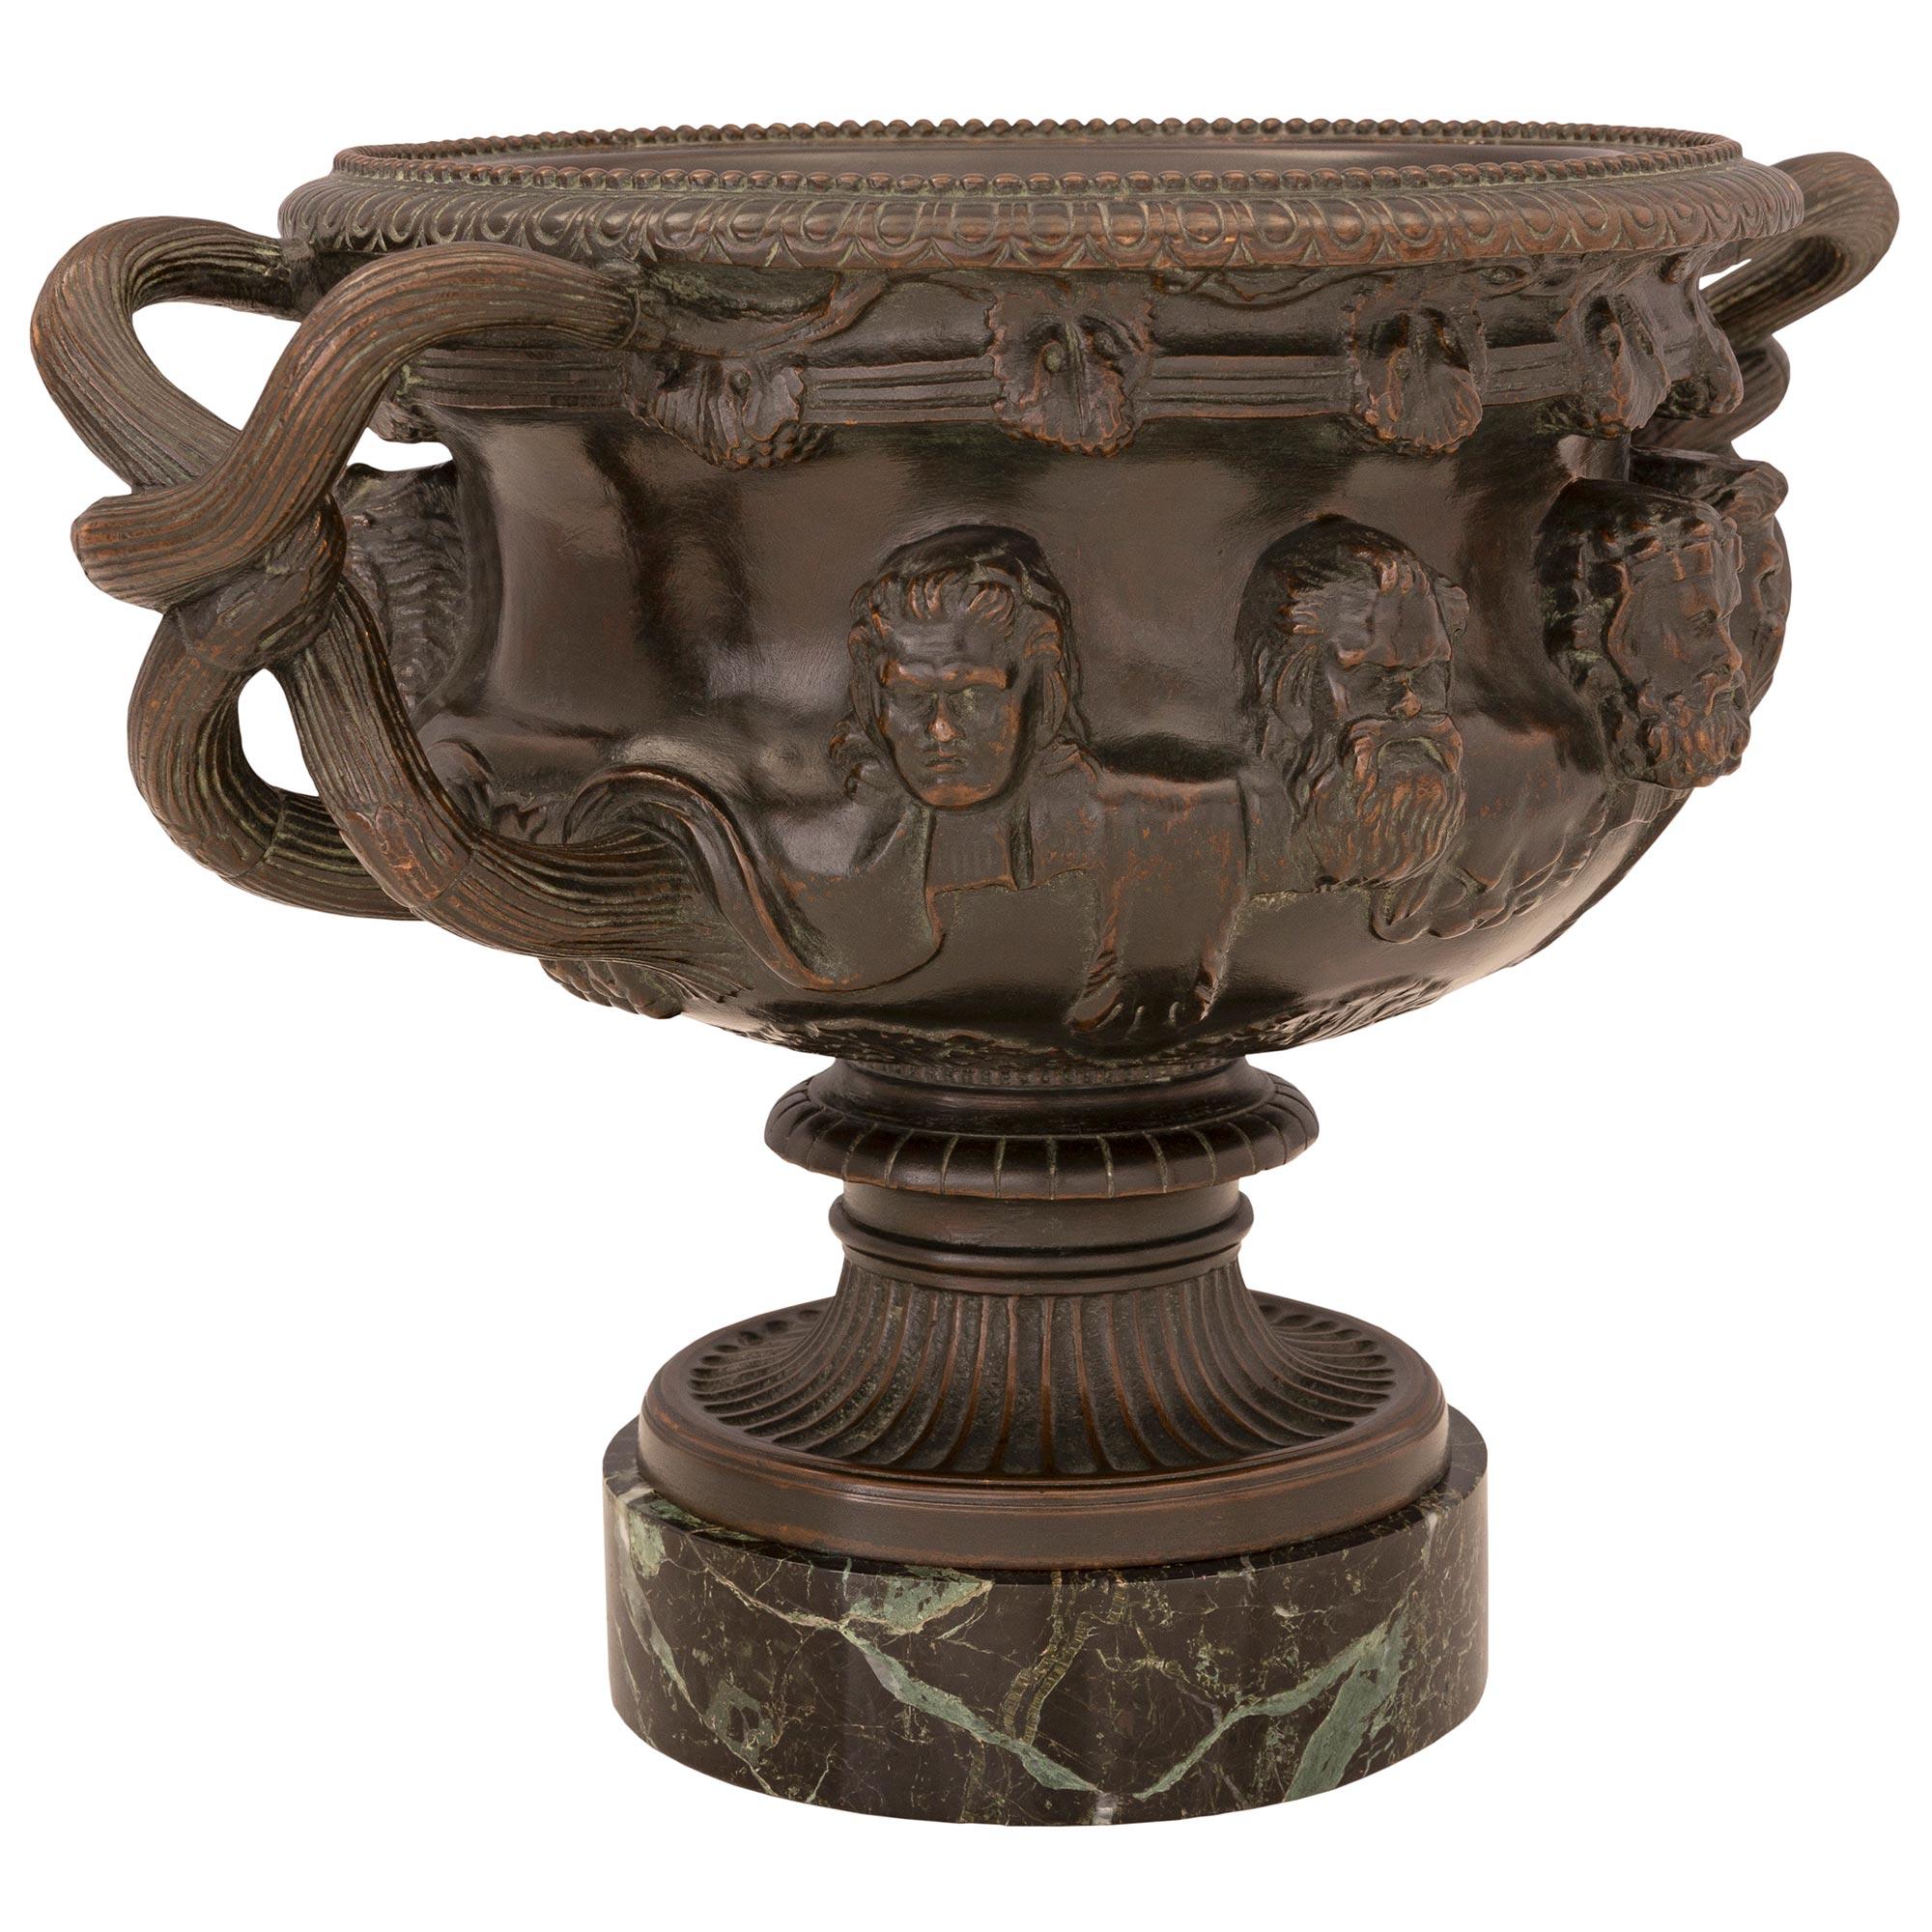 A handsome pair of French 19th century patinated bronze and Vert de Patricia marble tazzas, signed F. Barbedienne and after the renowned Albani vase. Each tazza is raised by a circular Vert de Patricia marble base below the fluted patinated bronze